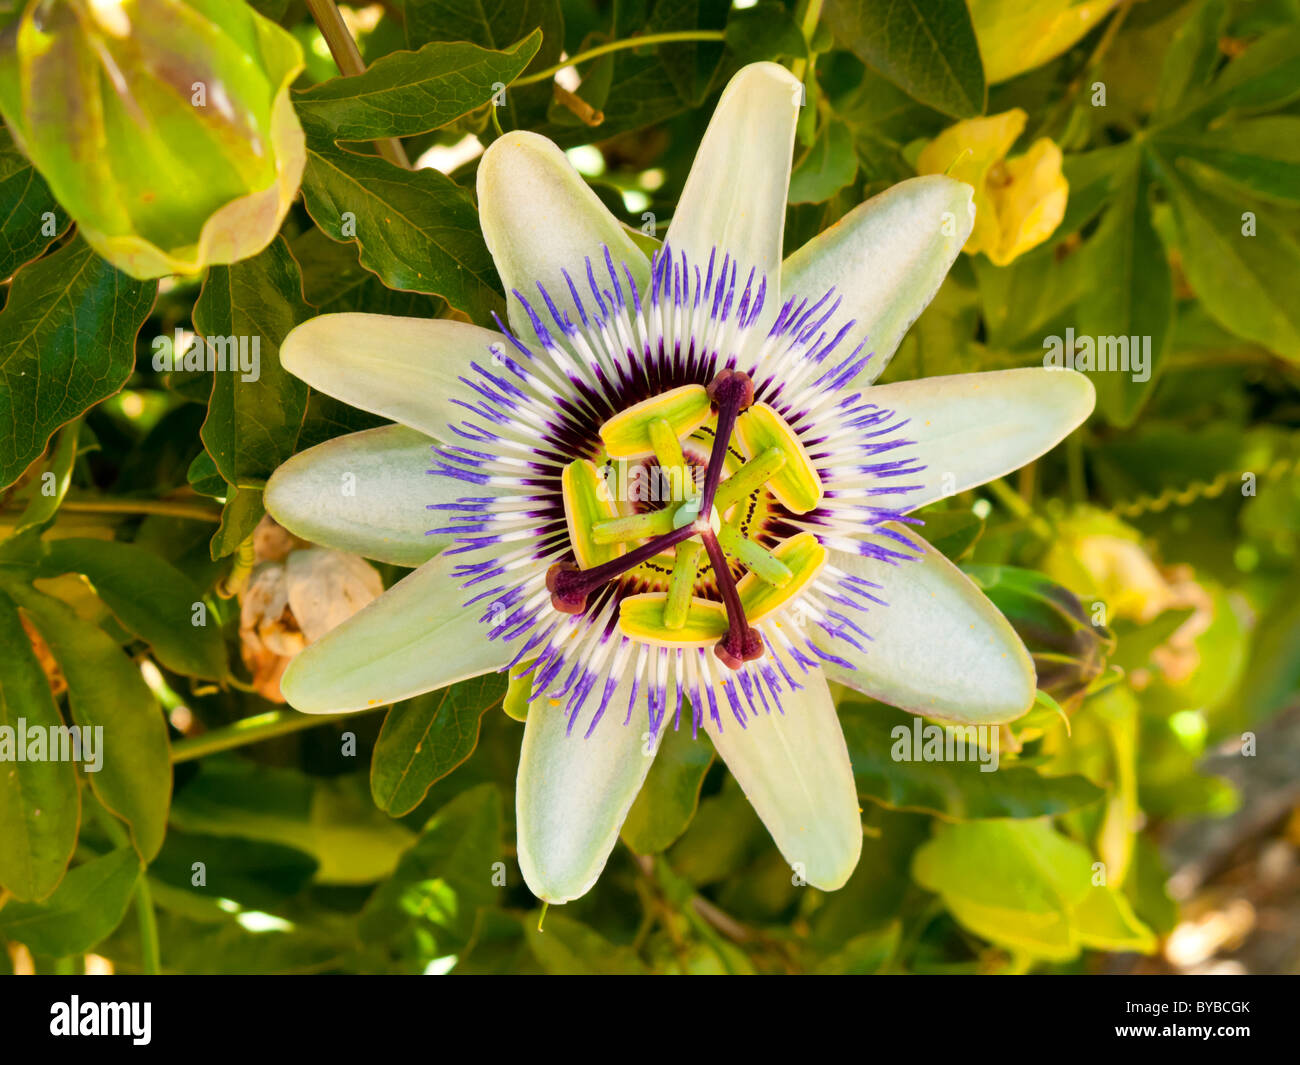 Close up view of passion flower passiflora with distinctive petals Stock Photo